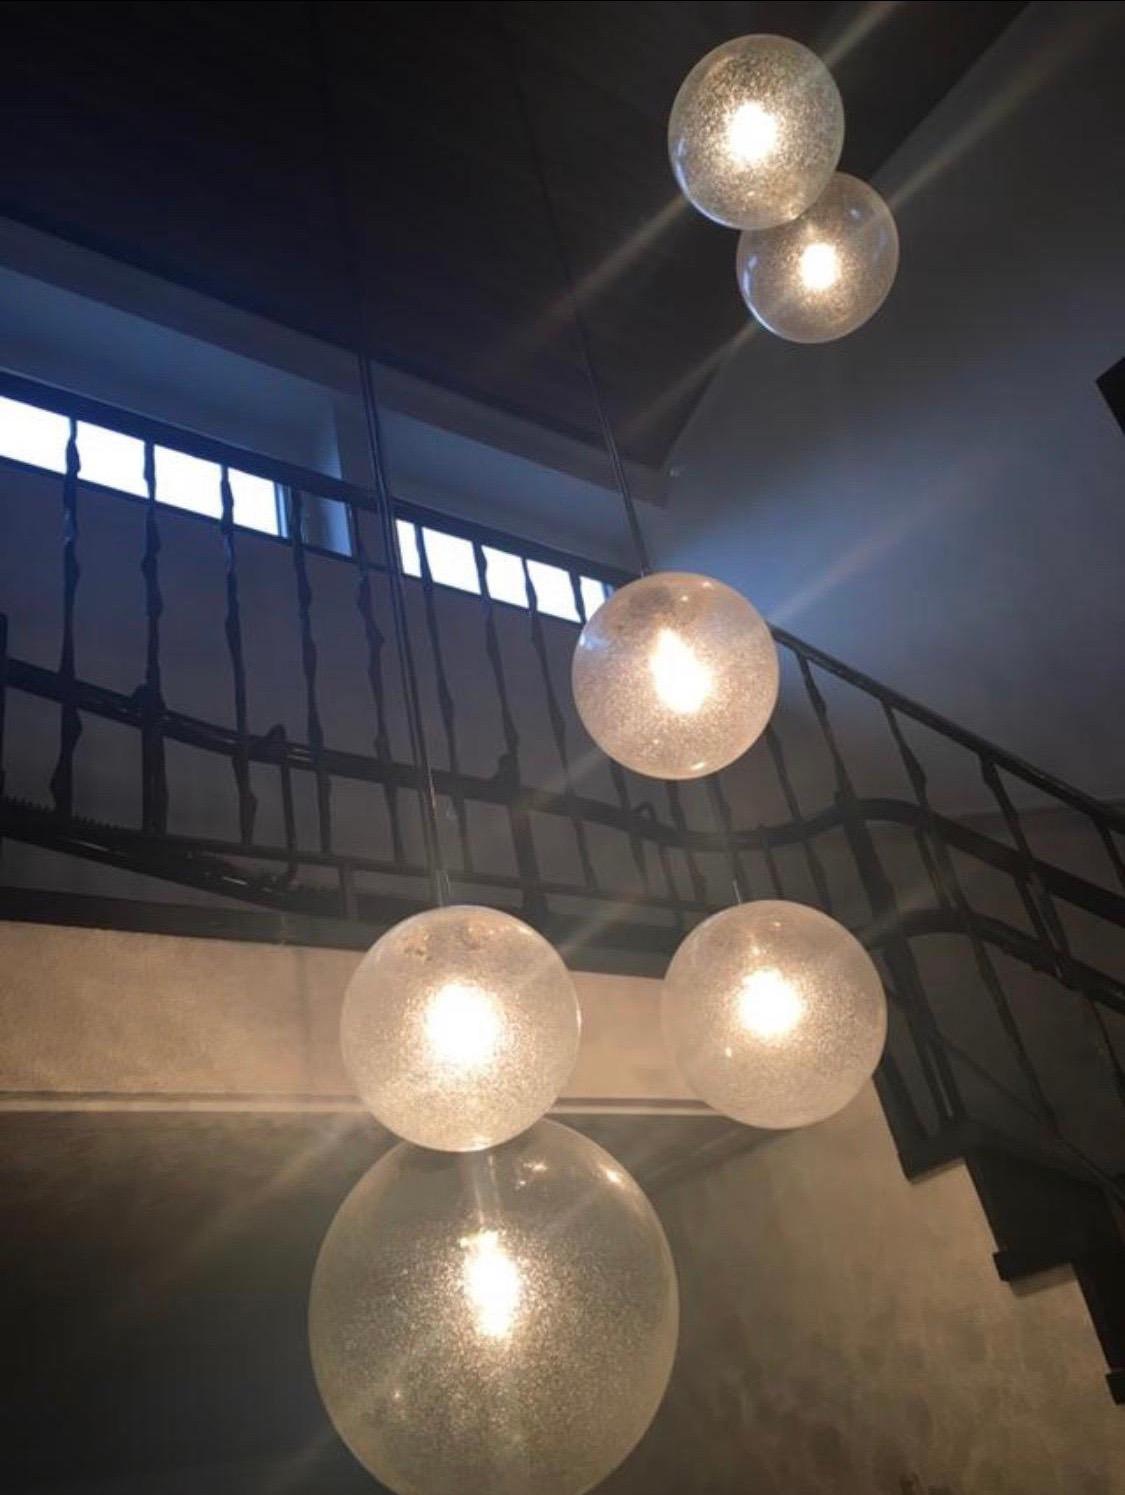 Cascade chandelier bubble glass , glass balls Kalmar/Putzler, 1960, Vienna, Austria.
Six various sized lid up glass balls with numerous tiny air bubbles in the glass lid up by a single Edison 40W bulb.
Great for a stairway or an installation for a